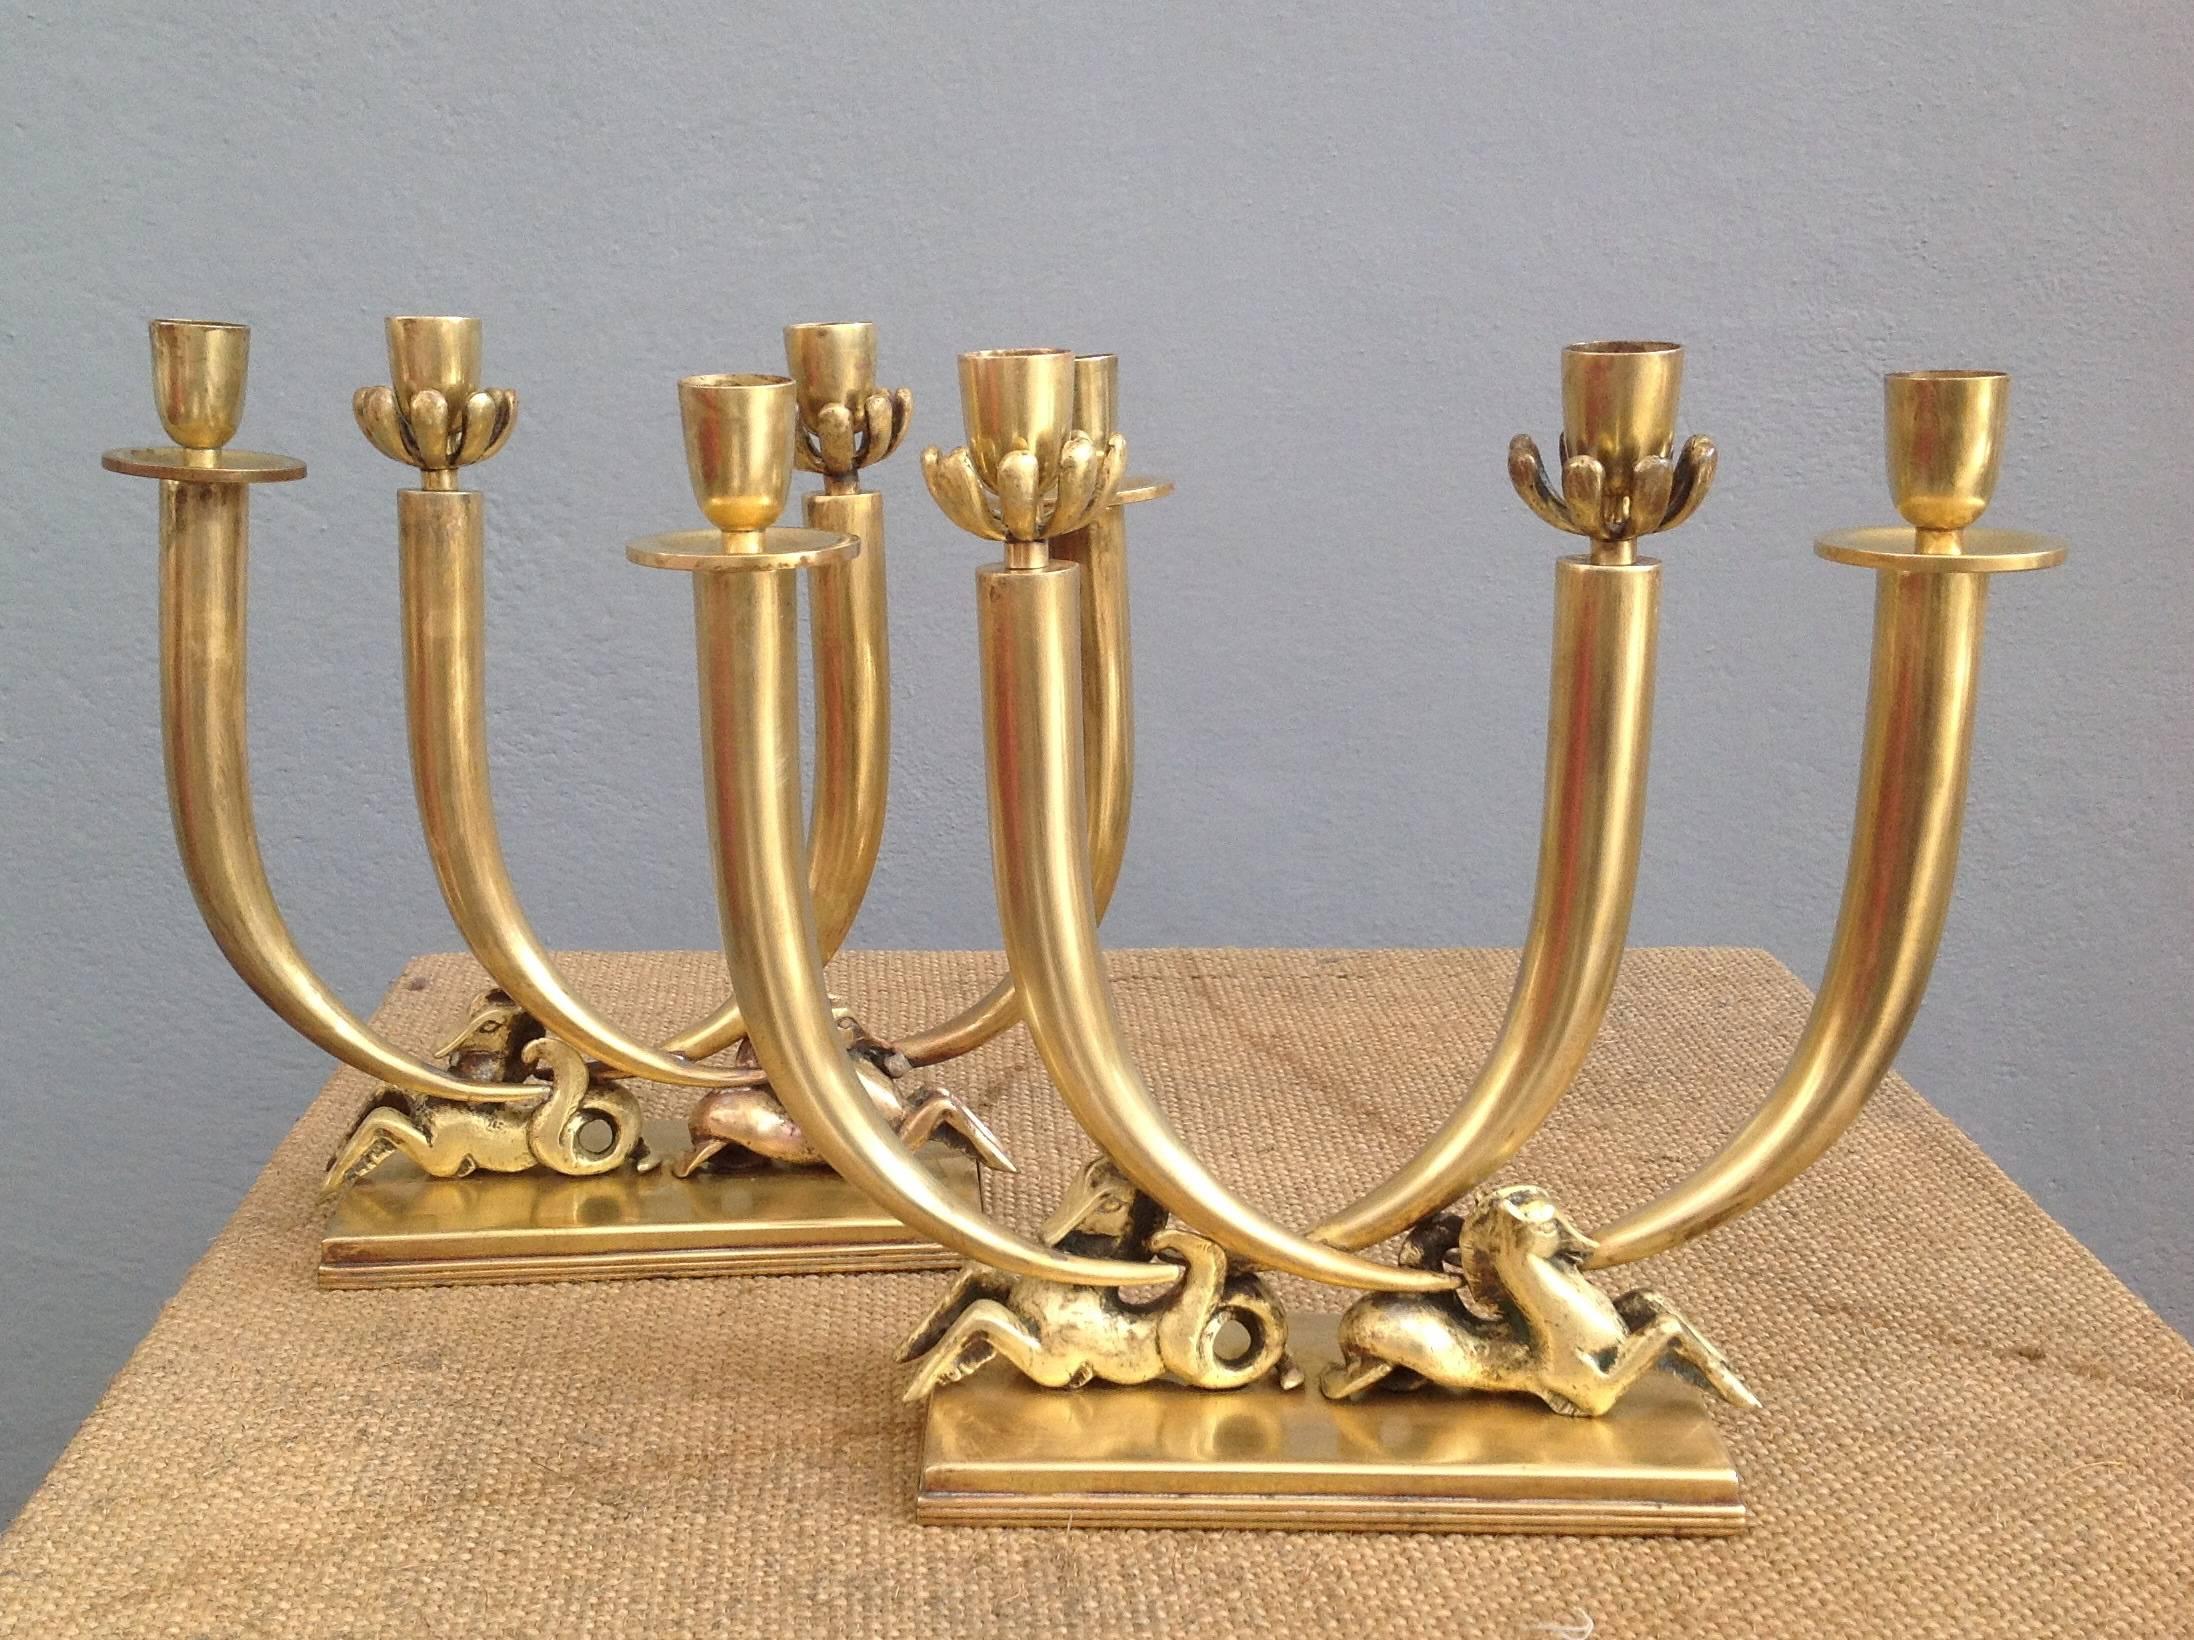 Elegant pair of brass candle holders inspired to Gio Ponti.